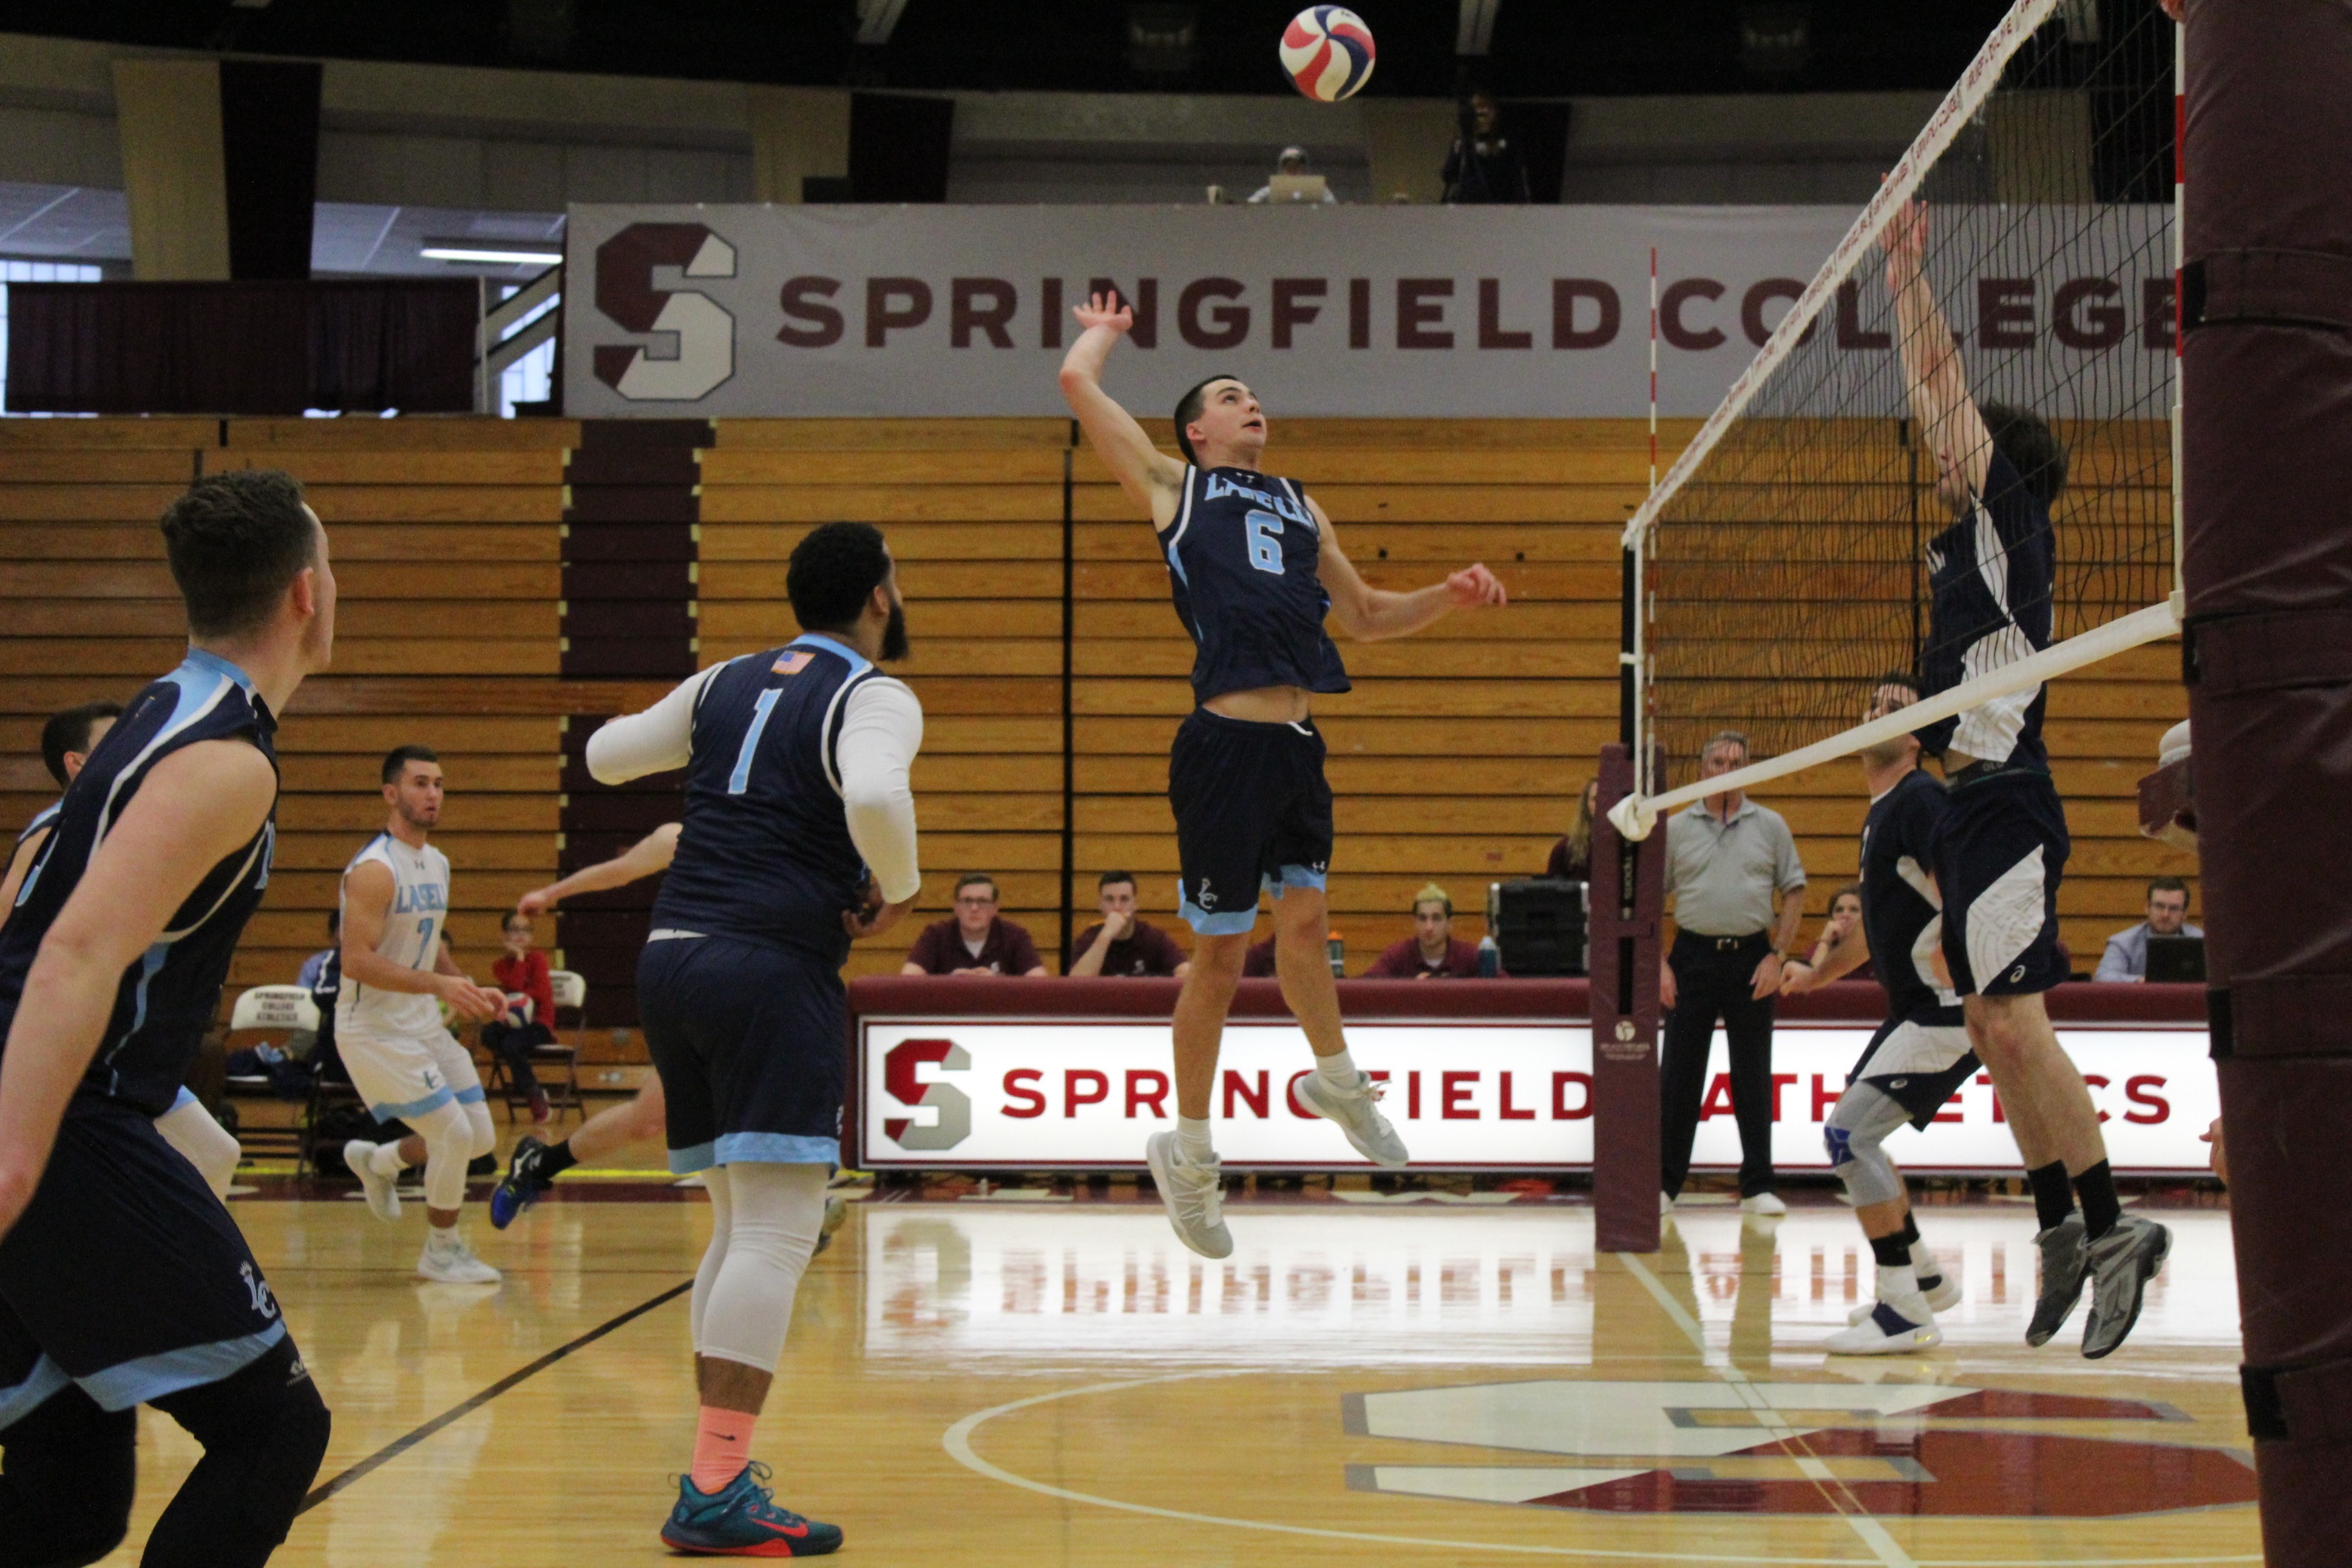 Lasell Men’s Volleyball upended by Rivier